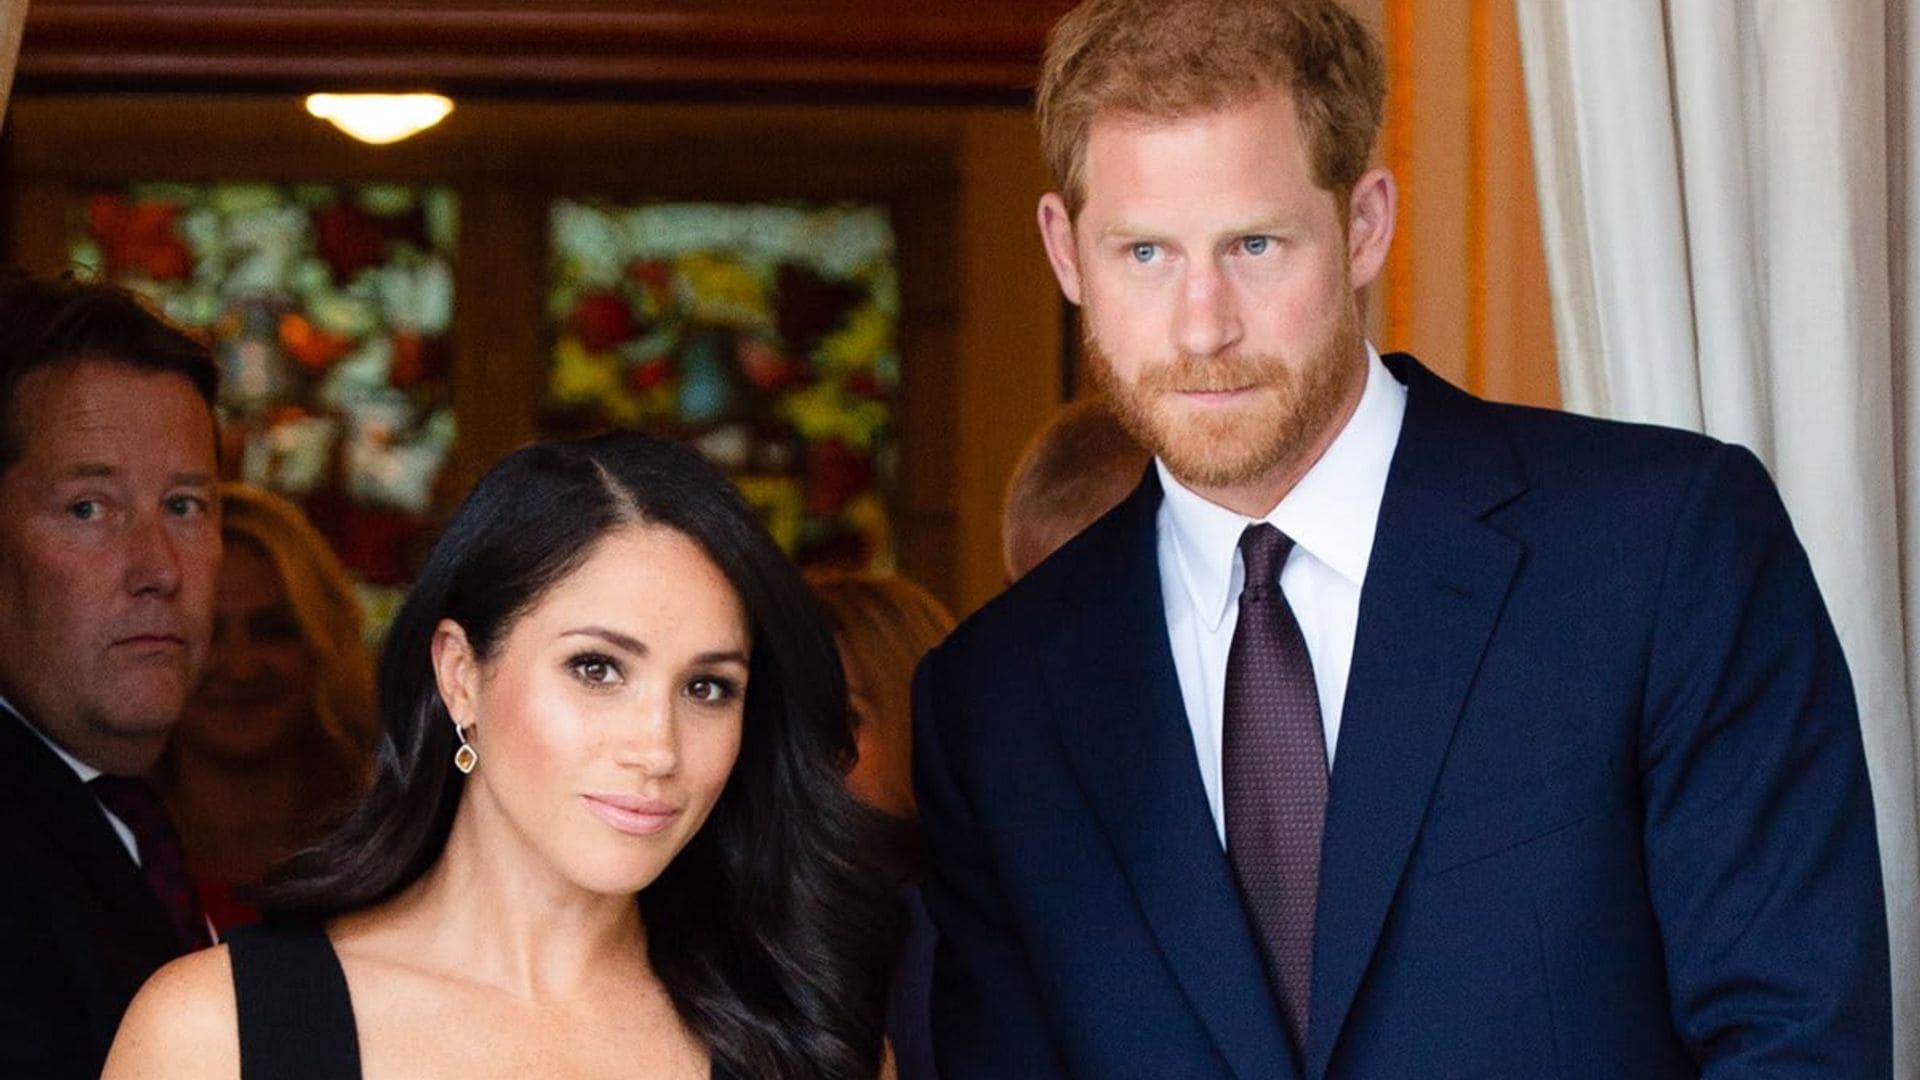 Why Prince Harry says he, Meghan Markle and kids are 'unable to return' to the UK